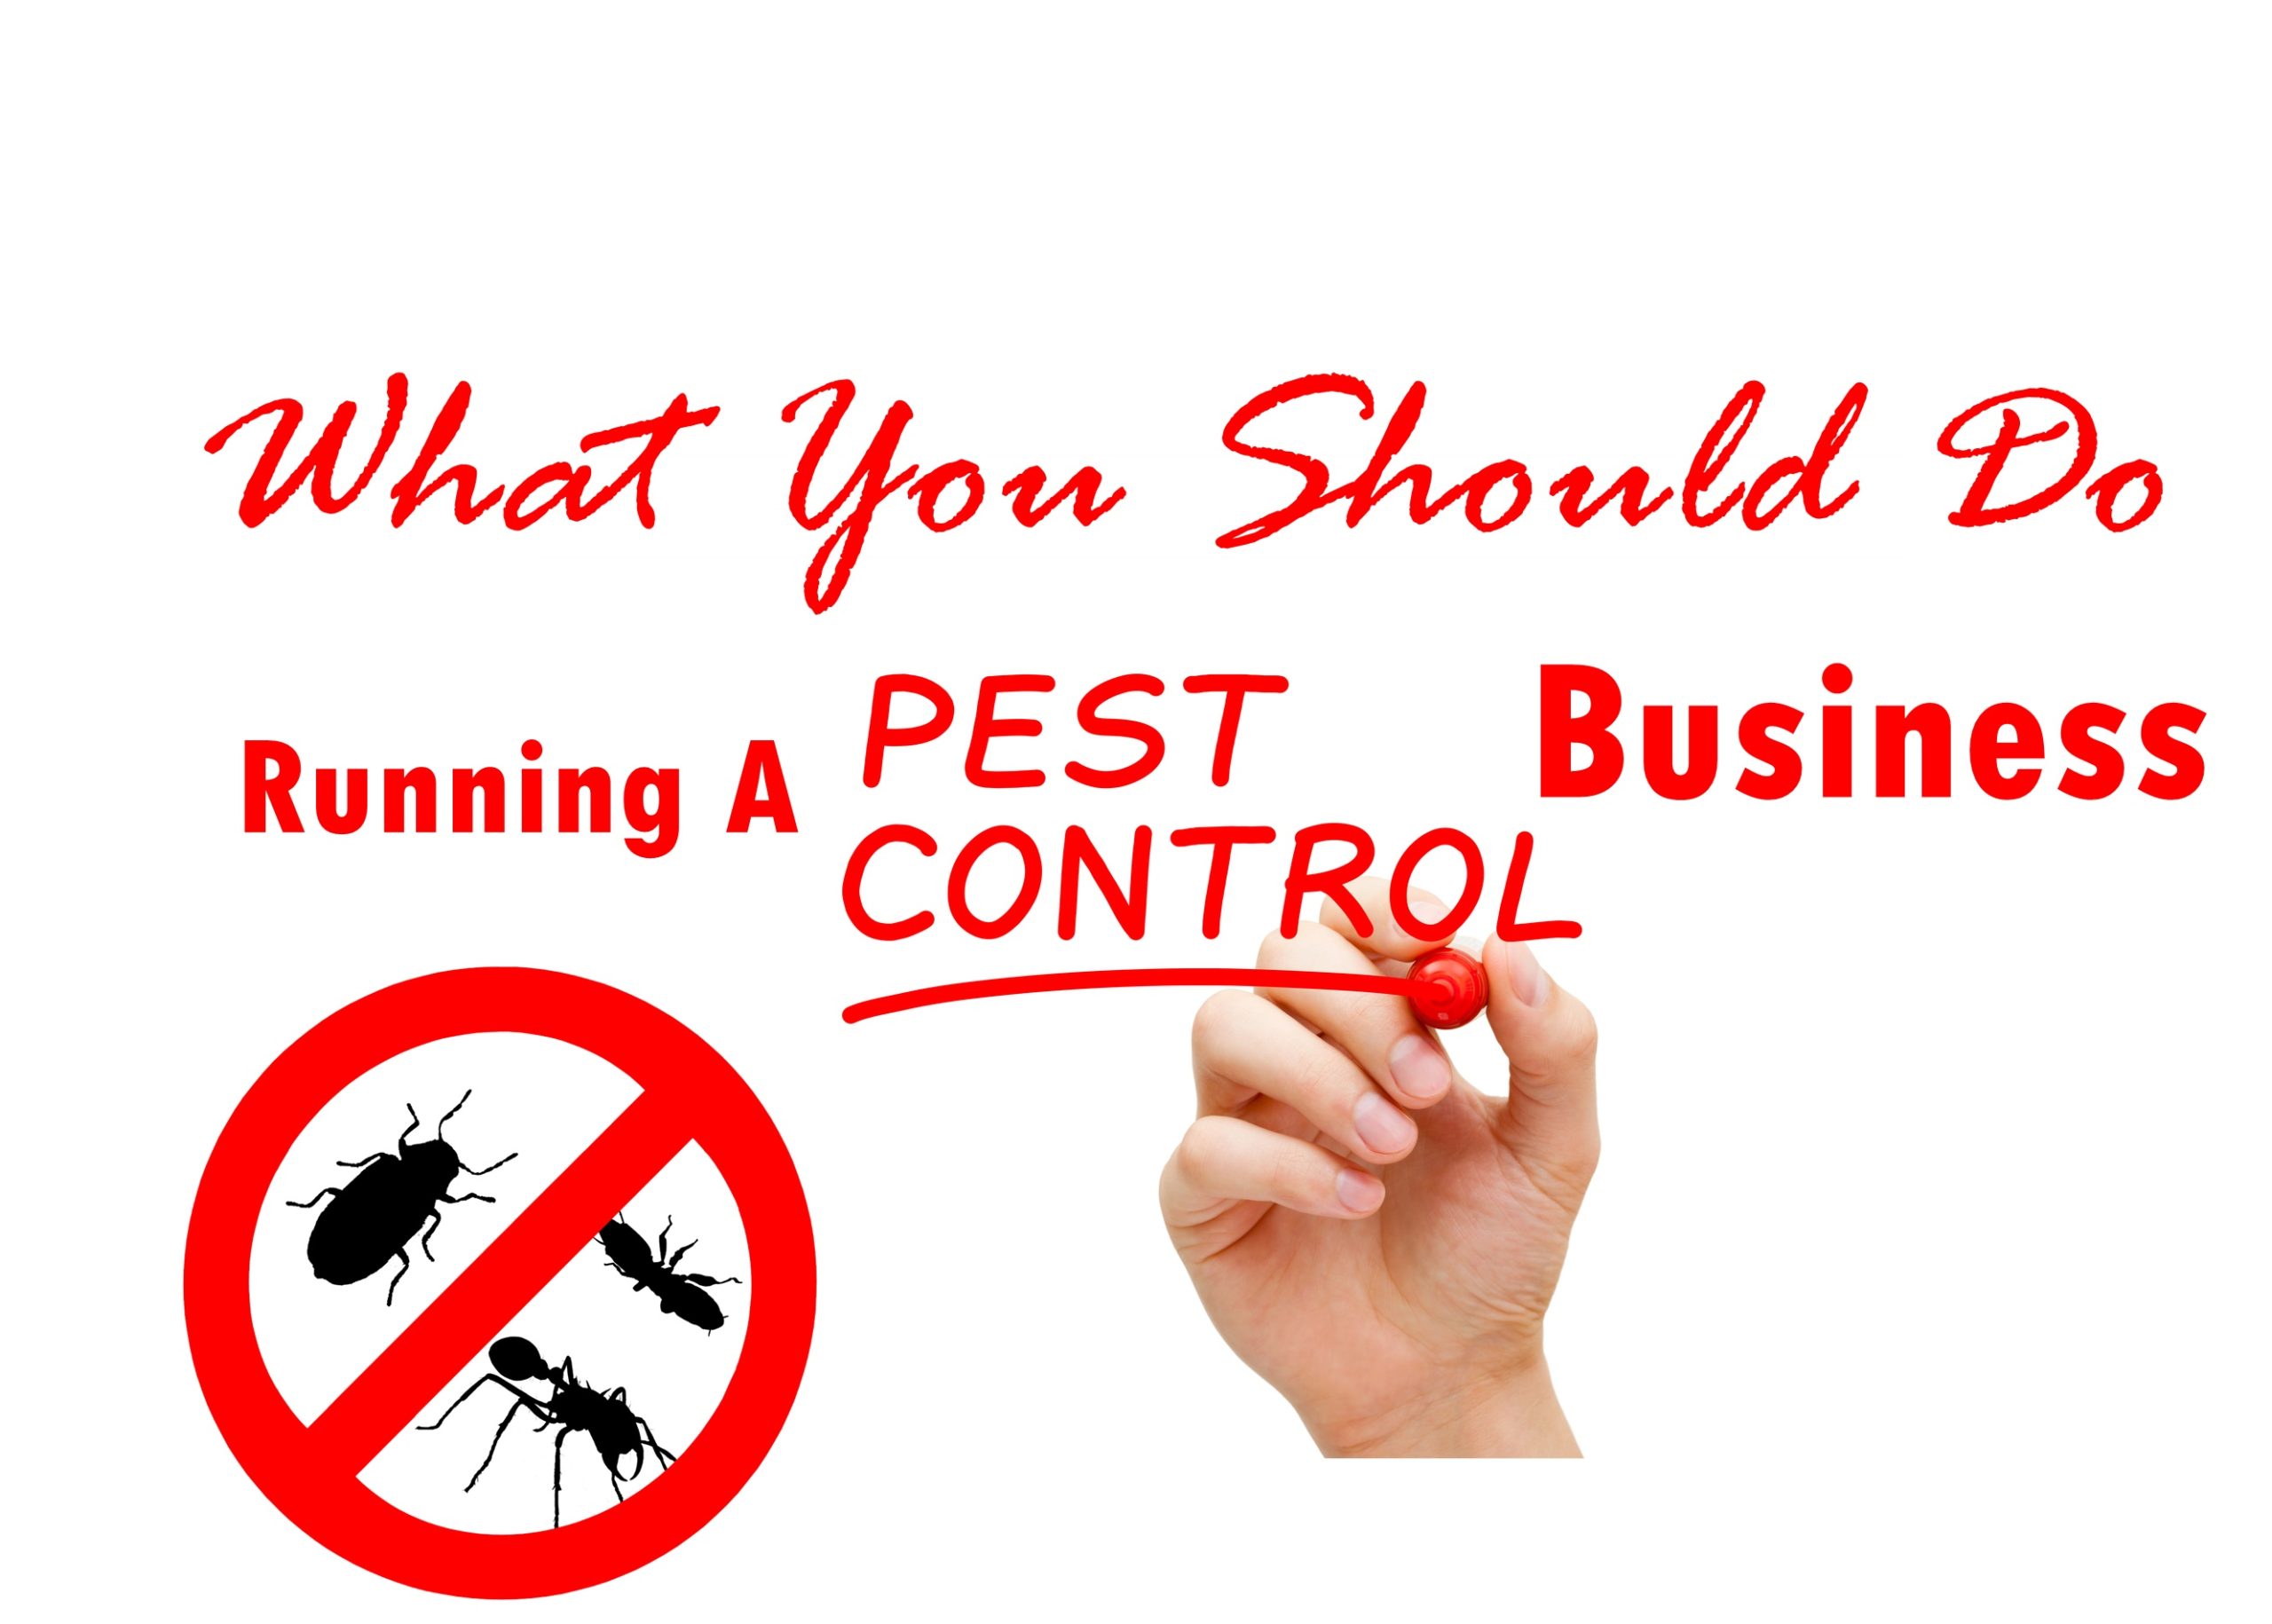 Running a Pest Control Business – What You Should Do